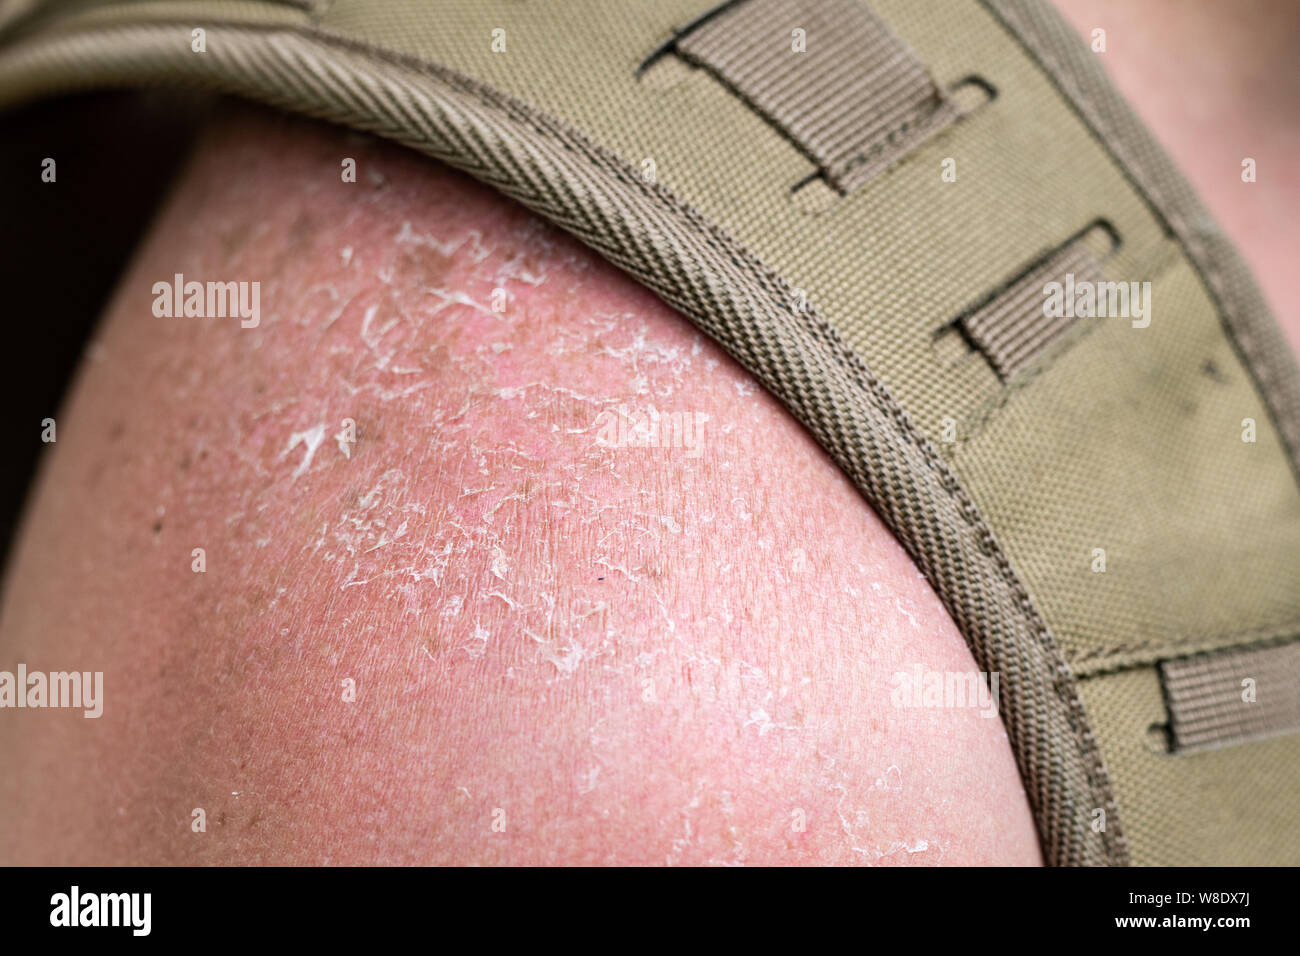 the skin on the tourist s shoulder is cracked and peeling off after a sunburn Stock Photo